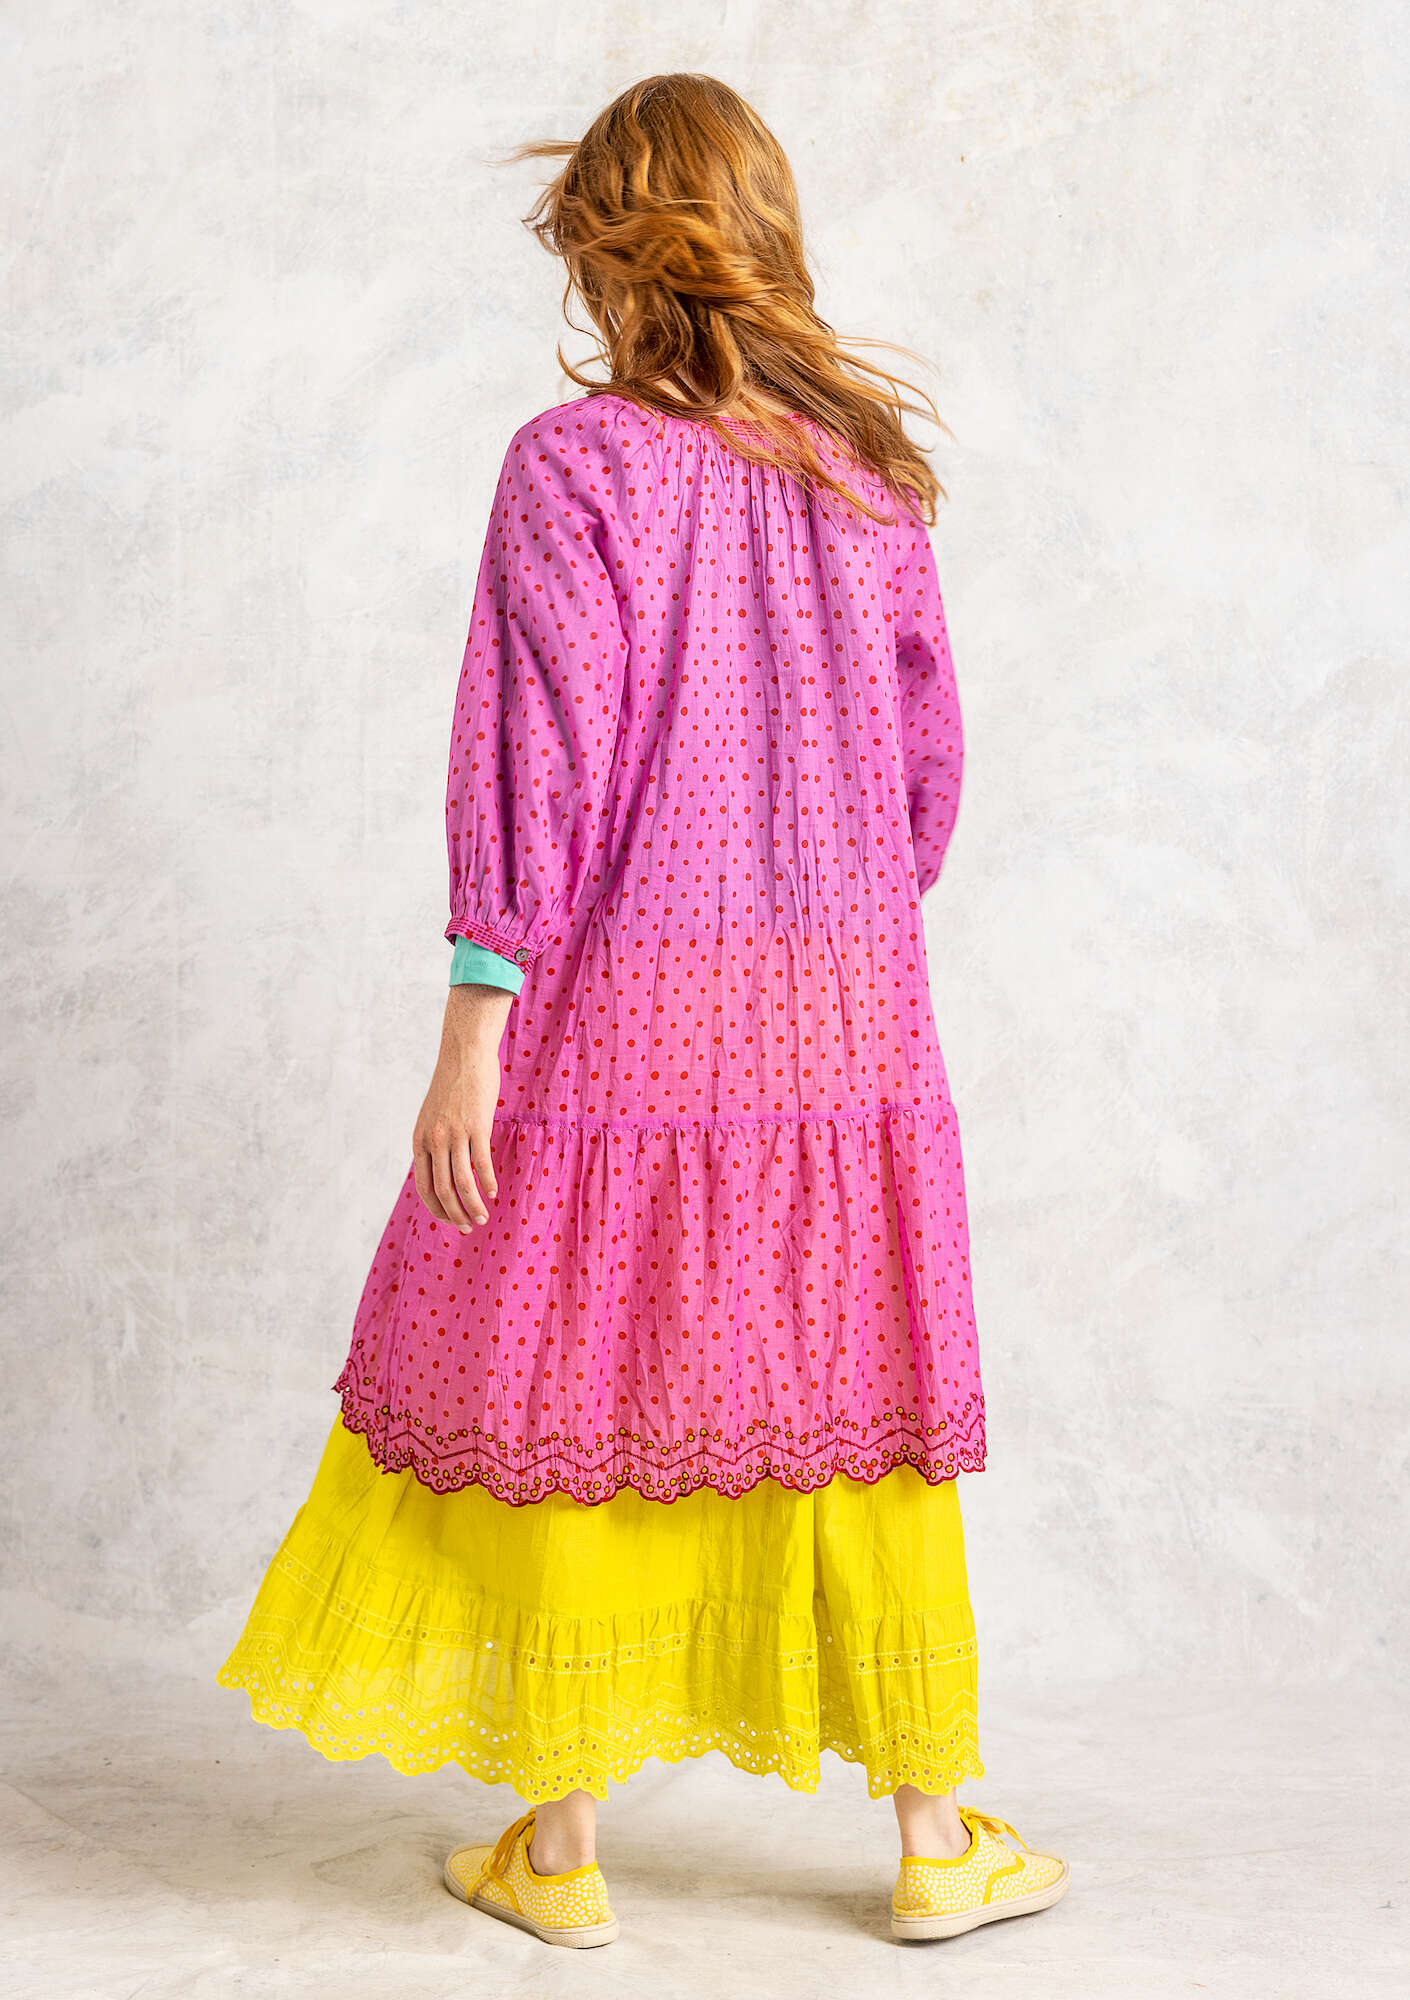 Woven “Lilly” dress in organic cotton wild rose